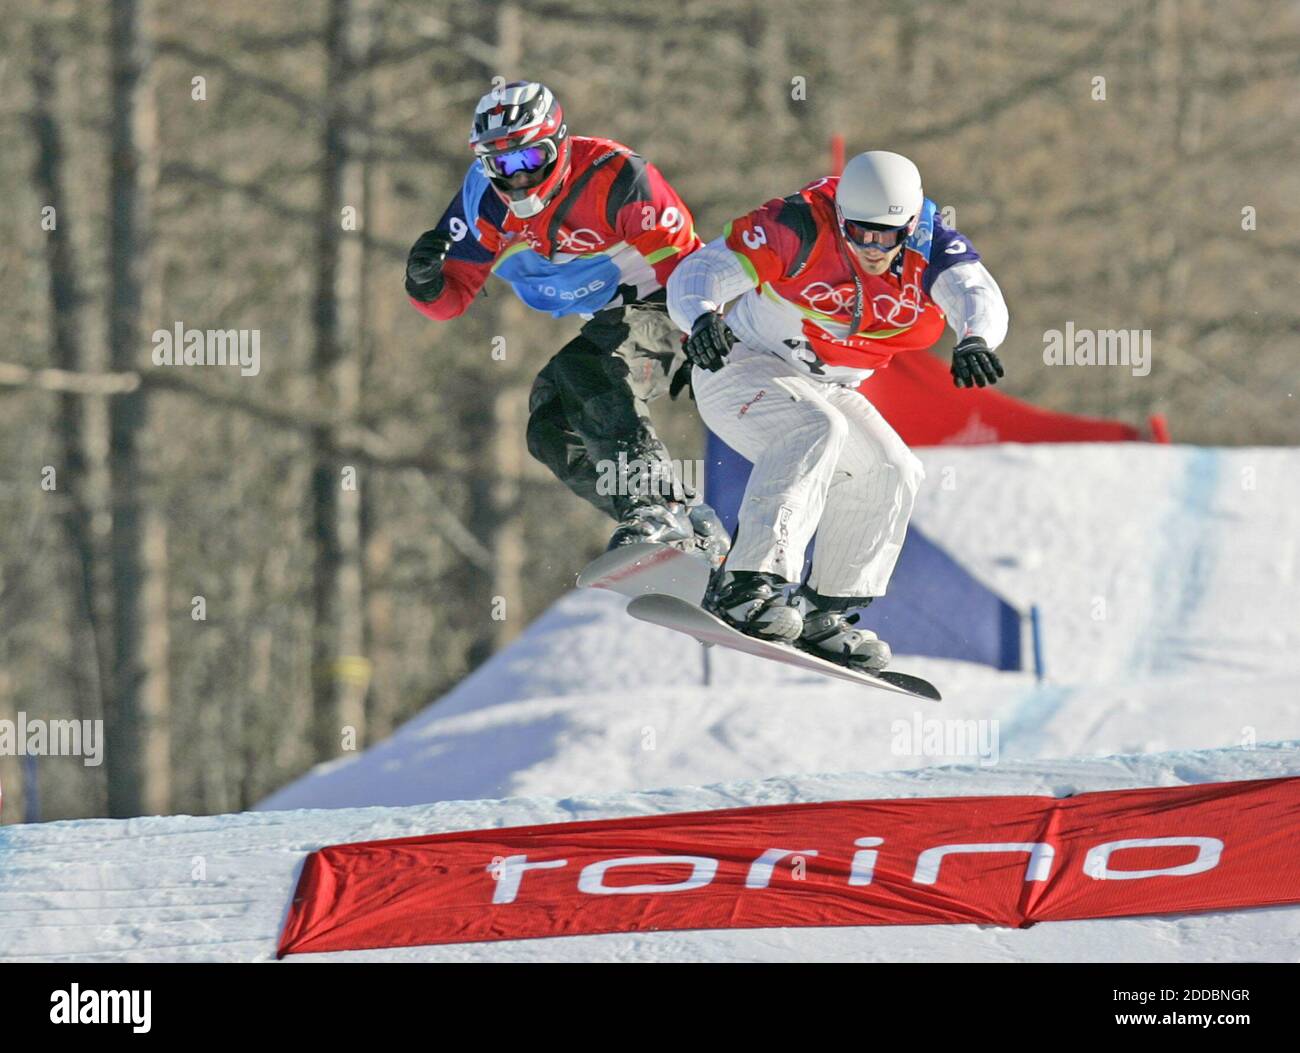 NO FILM, NO VIDEO, NO TV, NO DOCUMENTARY - Seth Wescott of the United States, right,soars toward the finish line for the first ever gold medal in snowboard-cross in Bardonecchia, at left is Radoslav Zidek of Slovakia who took the sliver at the XX Winter Olympic Games in Turin, Italy on February 16, 2006. Photo by Joe Rimkus Jr./Miami Herald/ KRT/Cameleon/ABACAPRESS.COM Stock Photo